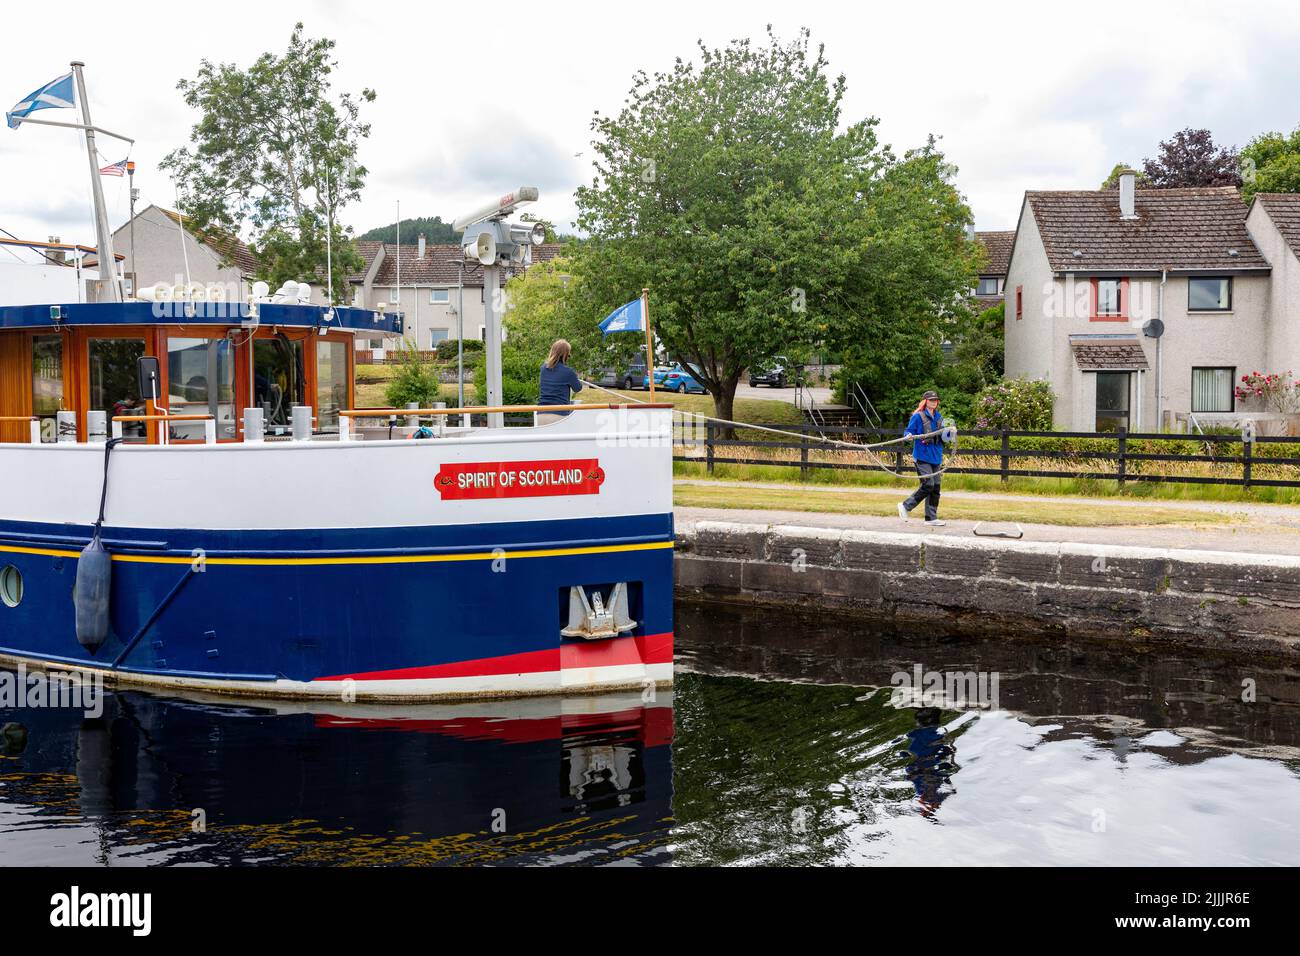 Spirit of Scotland boat vessel moves through the locks on the Caledonian Canal at Inverness in Scotland during summer 2022.Scotland,UK Stock Photo